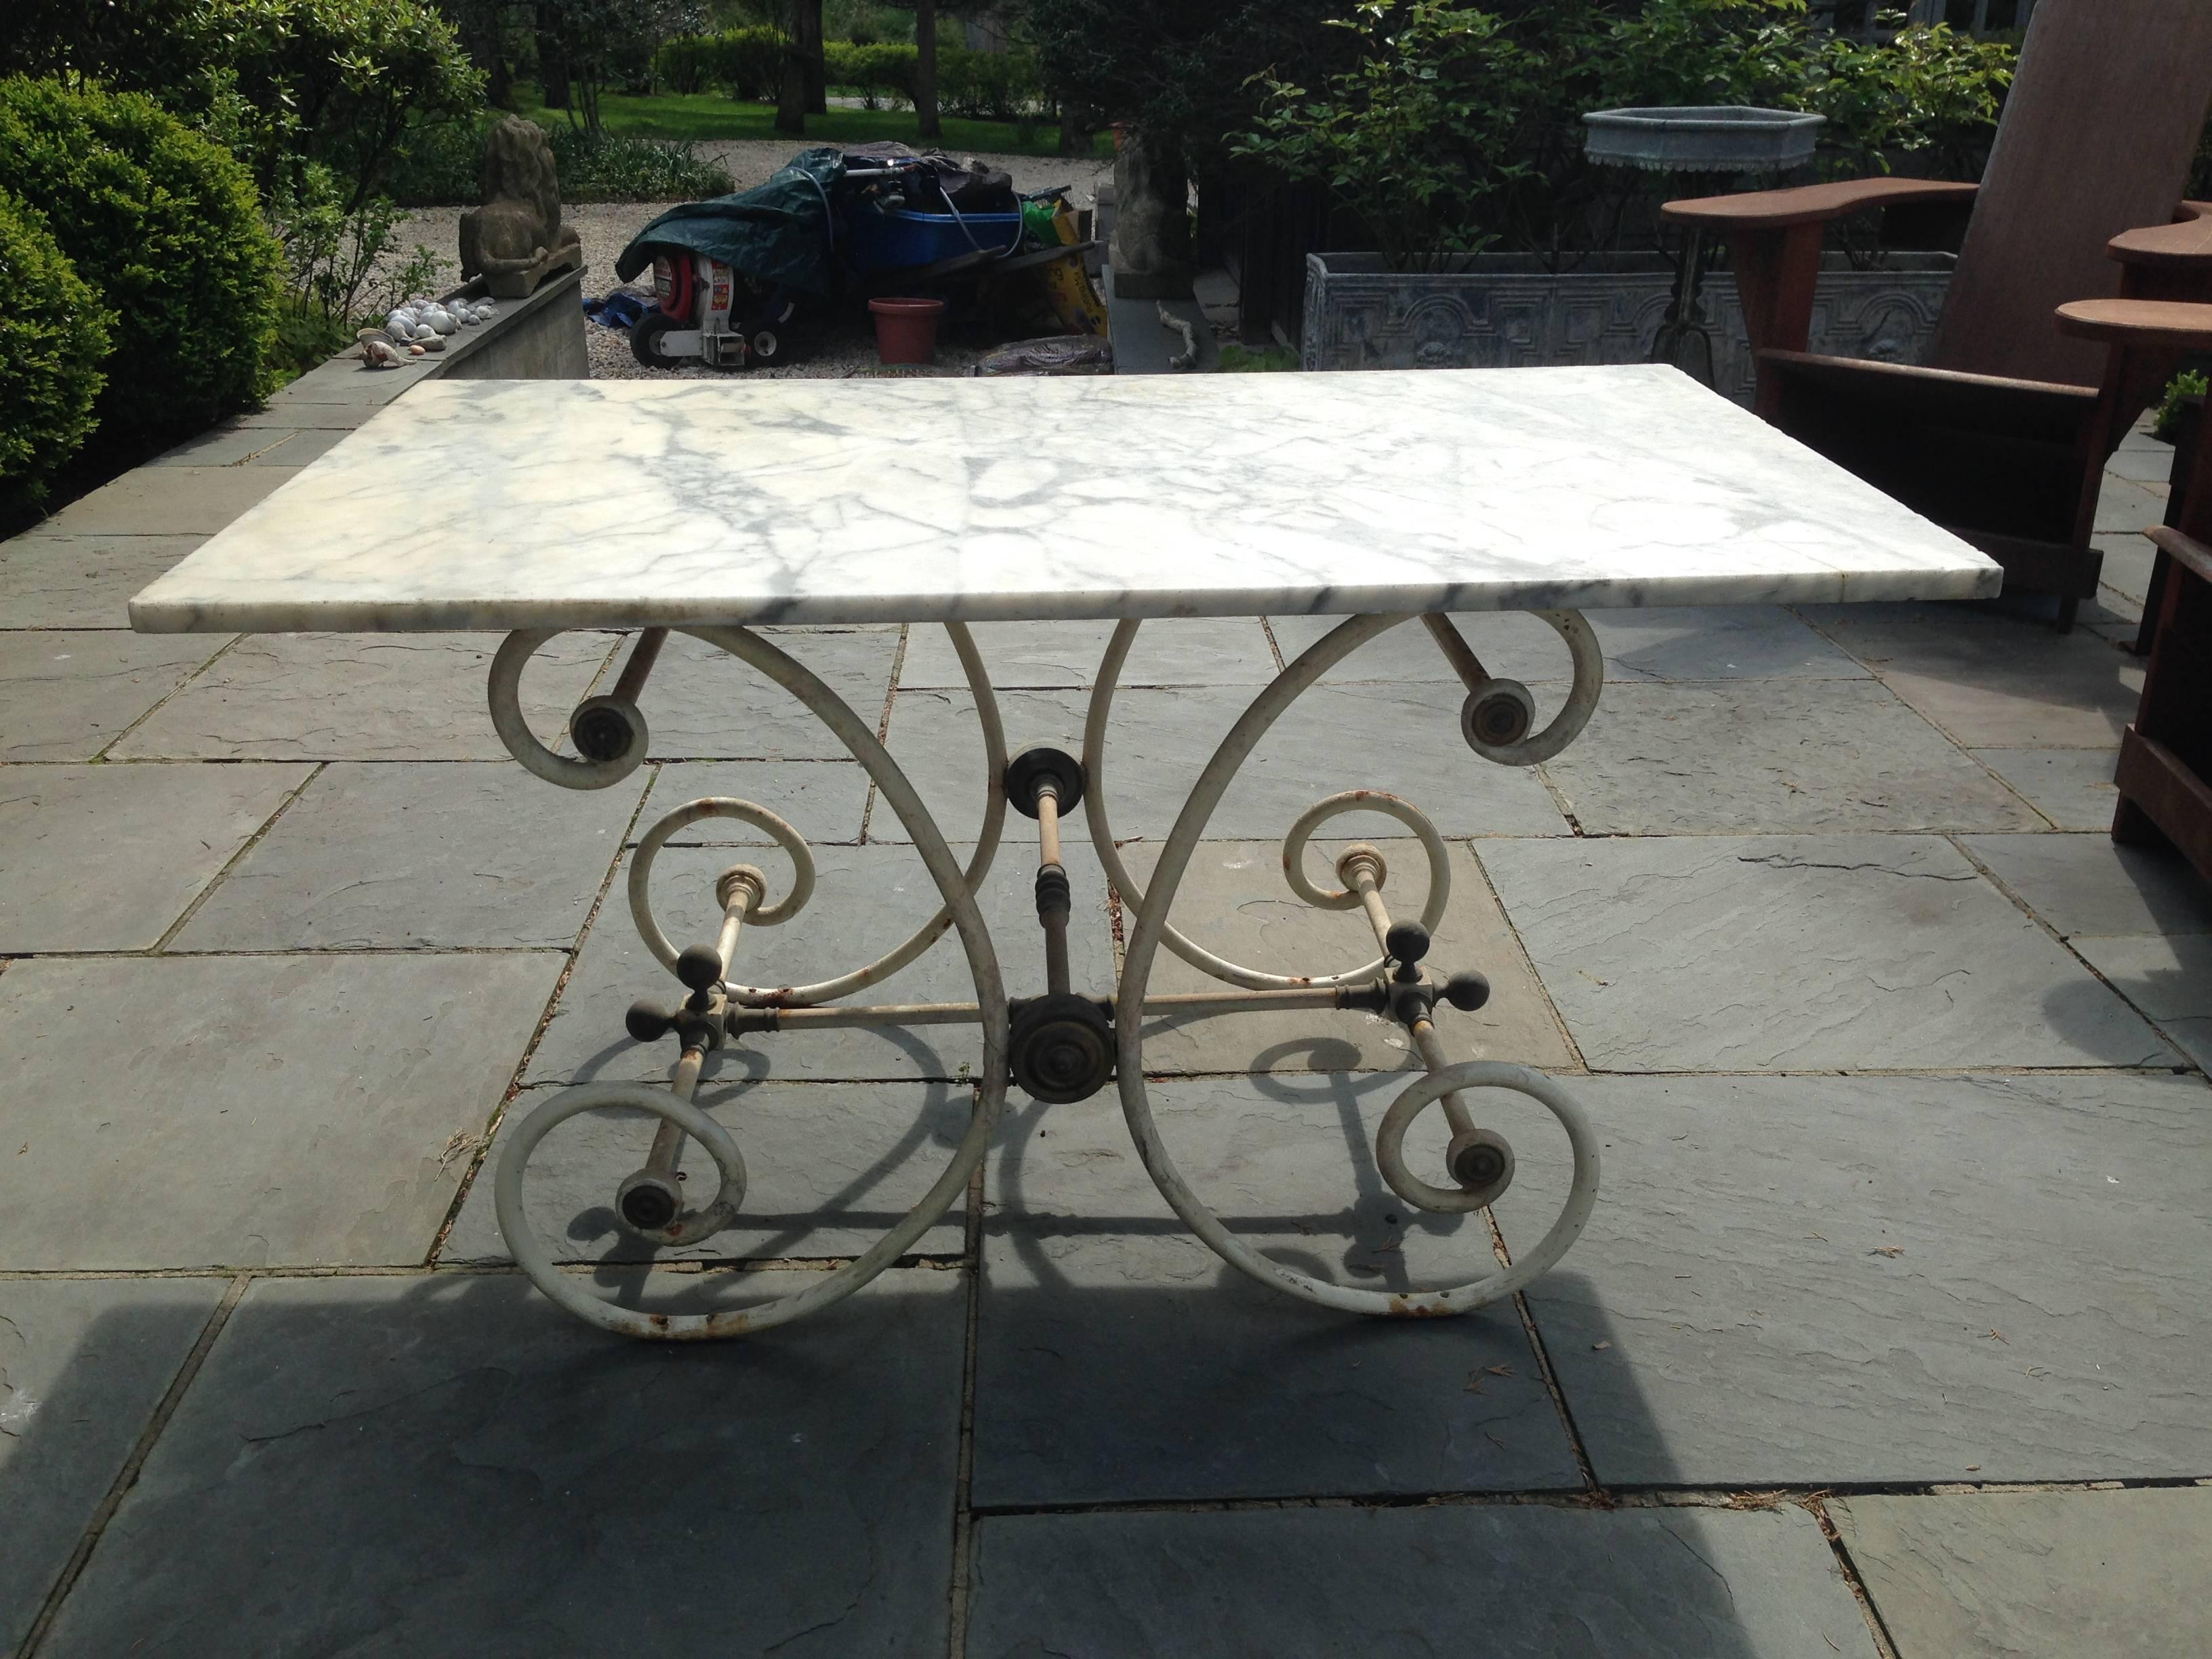 A late 19th century French pastry table with an old white marble top resting on the white painted base with brass decorative elements.